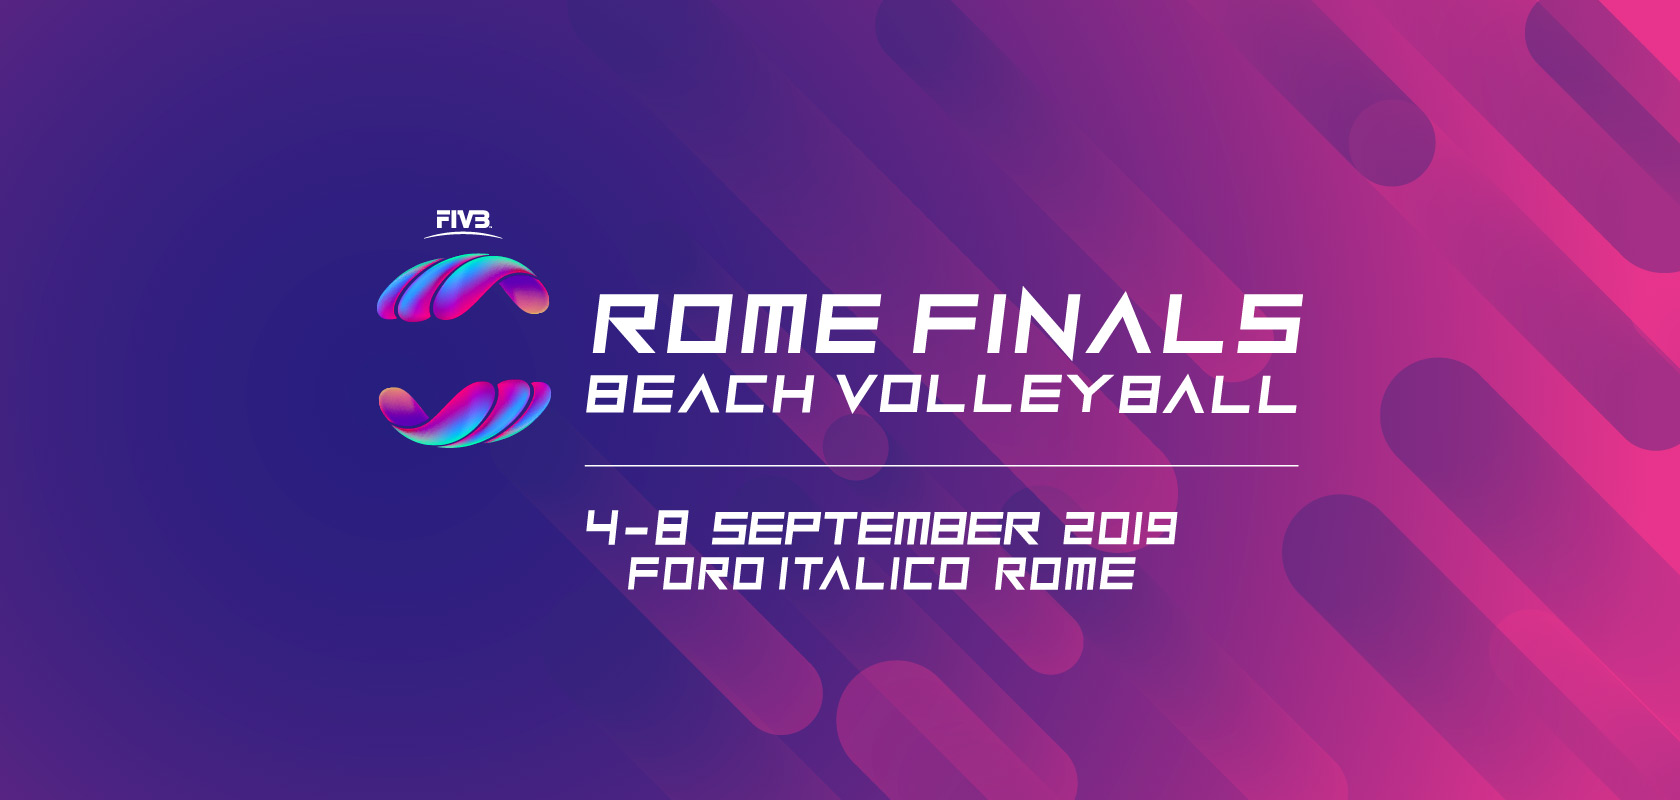 Ticketmaster Italy signs FIVB Beach Volleyball Rome Finals